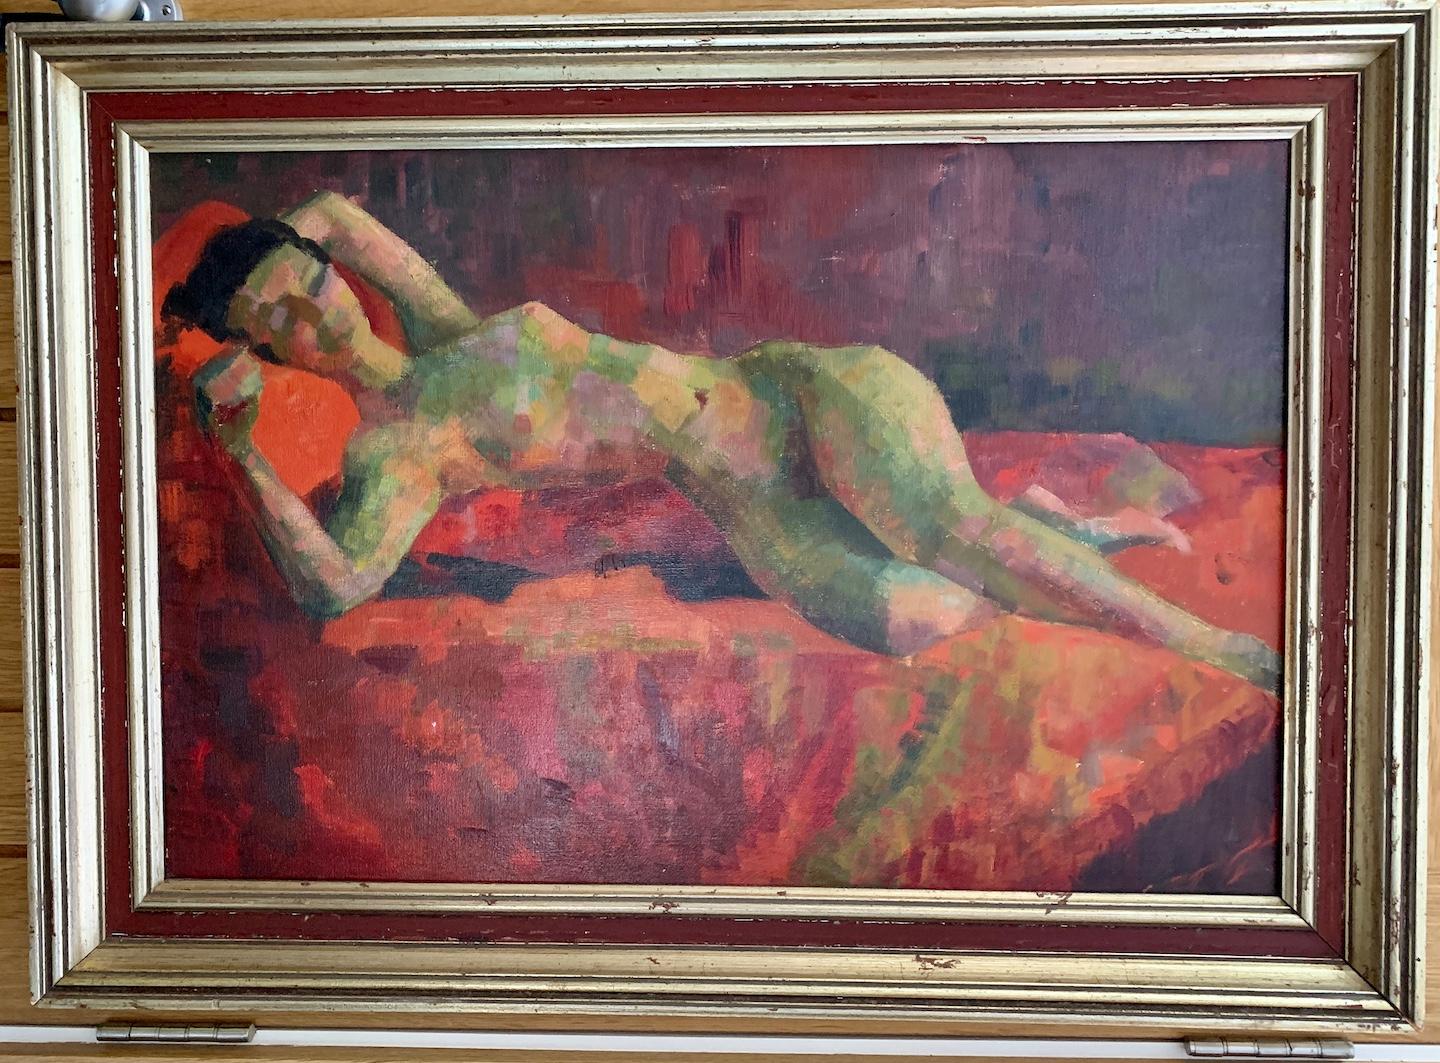 Mid Century Modern School, 

Circa 1960

Inscribed on the reverse, B Turner 1964

A very cool cubist painting of a reclining nude with a great deal of style.

Framed in its original vintage frame